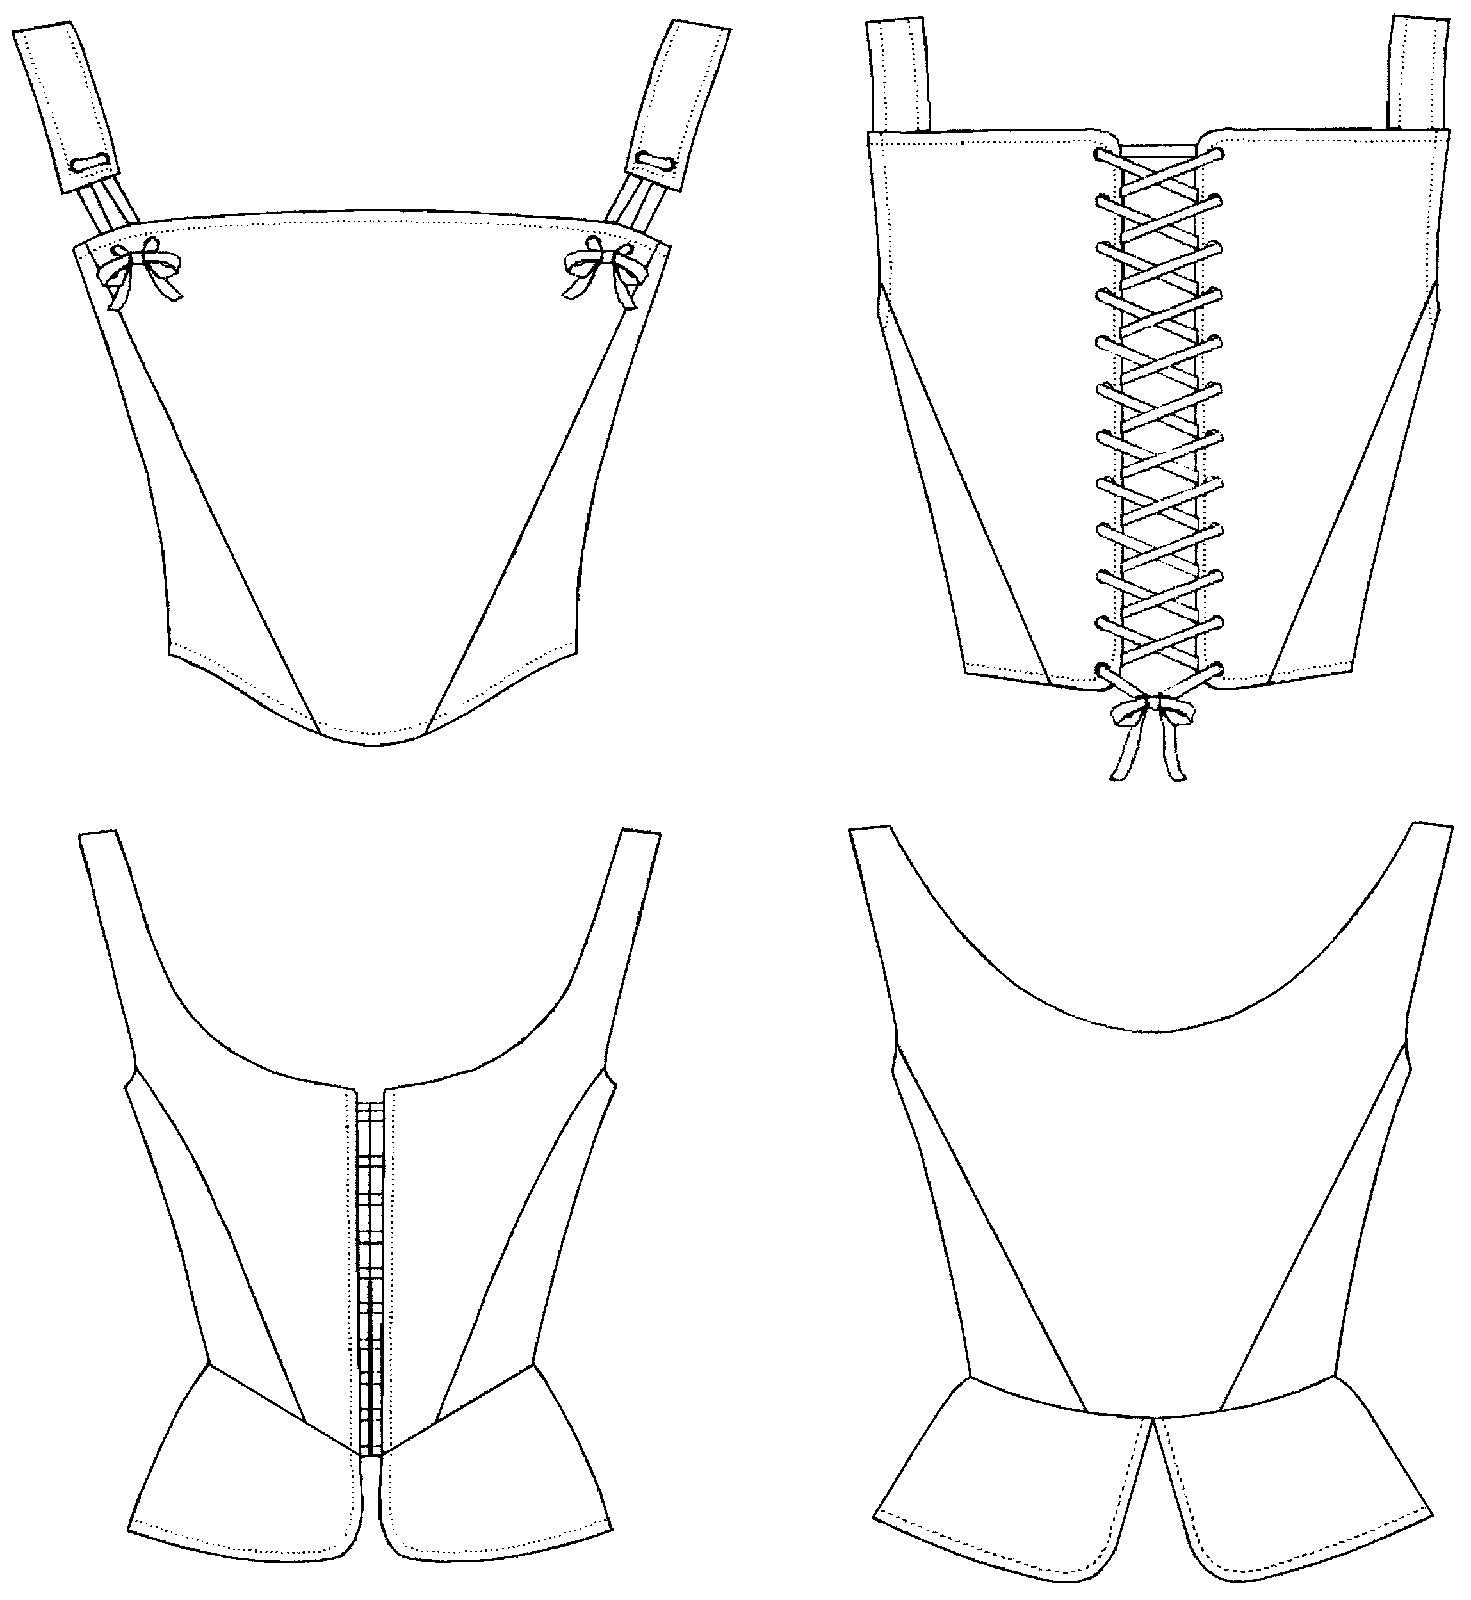 Black and white pattern drawings on the front and back view of the Square neck and Scoop neck of the #267 M" Lady's Corset.